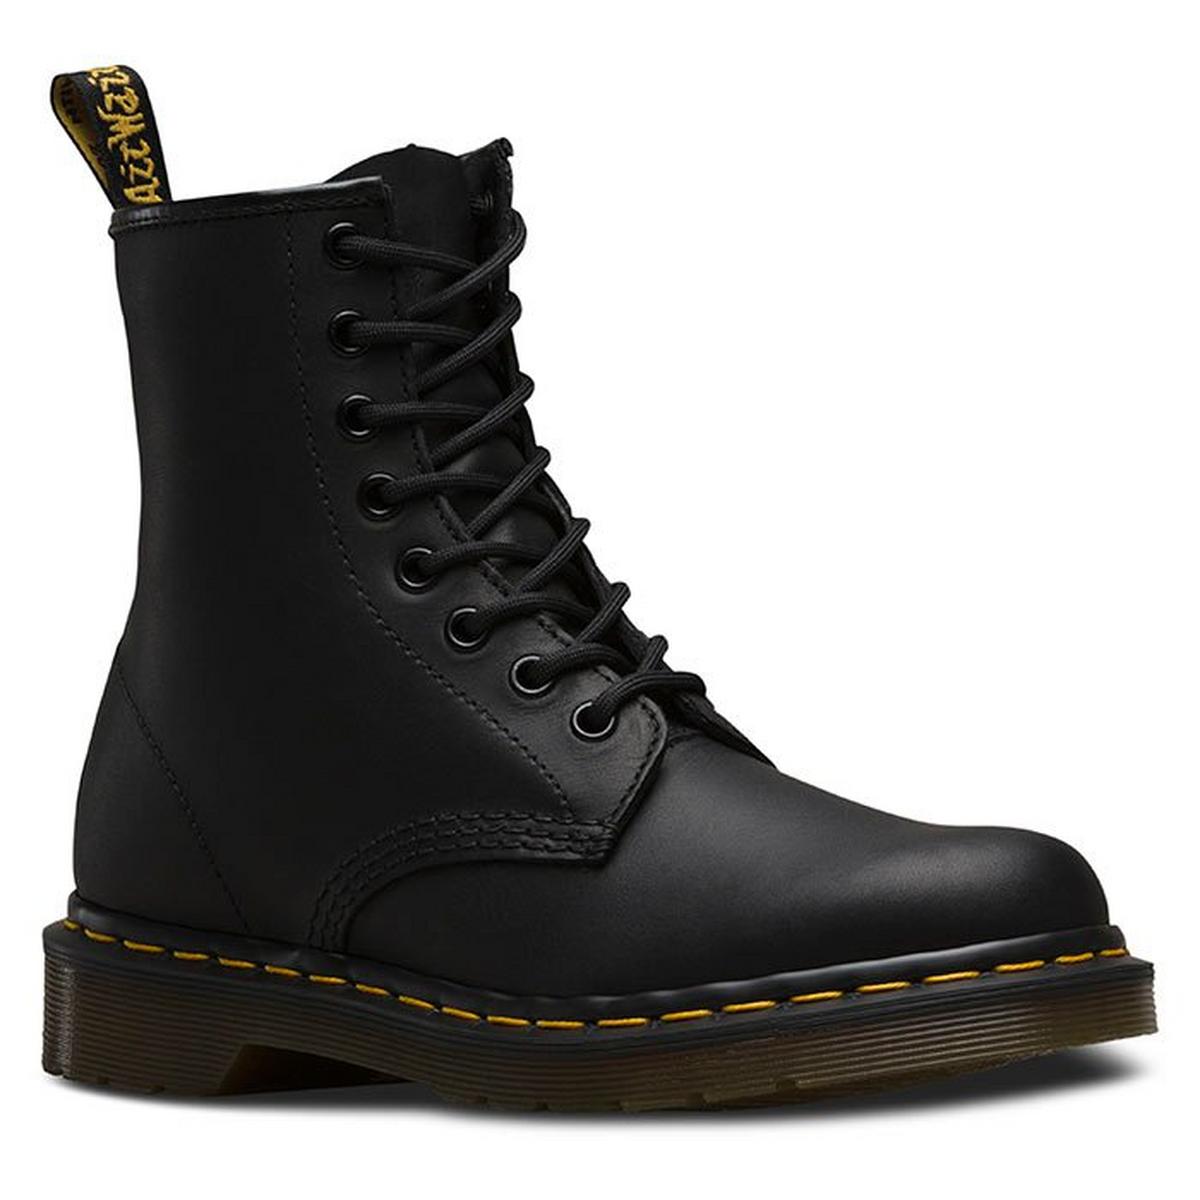 Bottes 1460 Greasy pour hommes